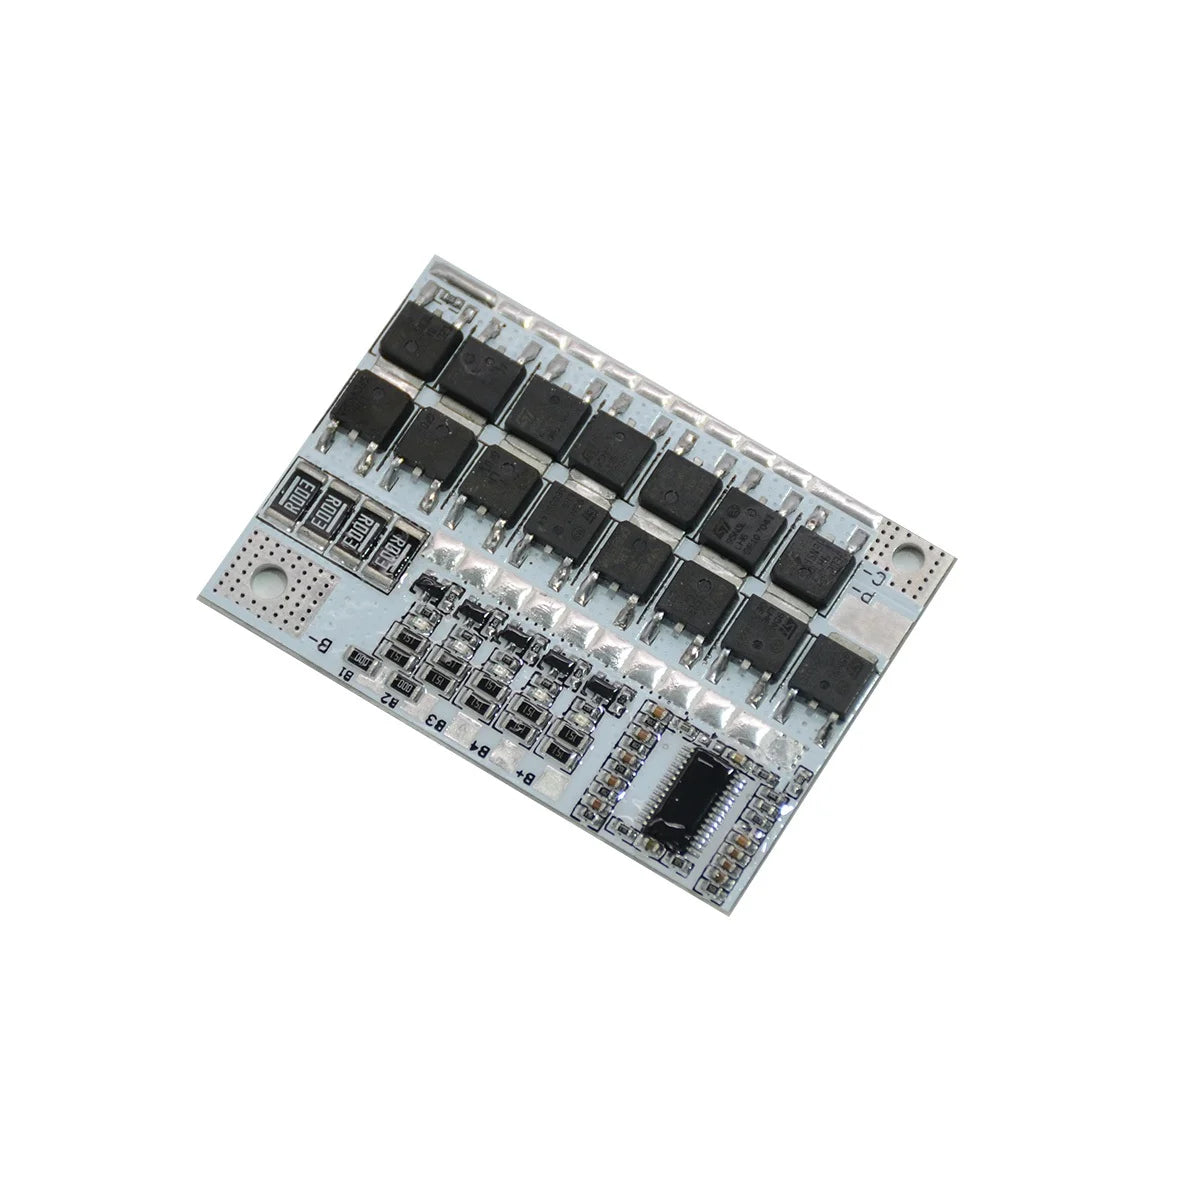 BMS 3S 12V 25A Lithium Battery Protection Board by Indian Hobby Center